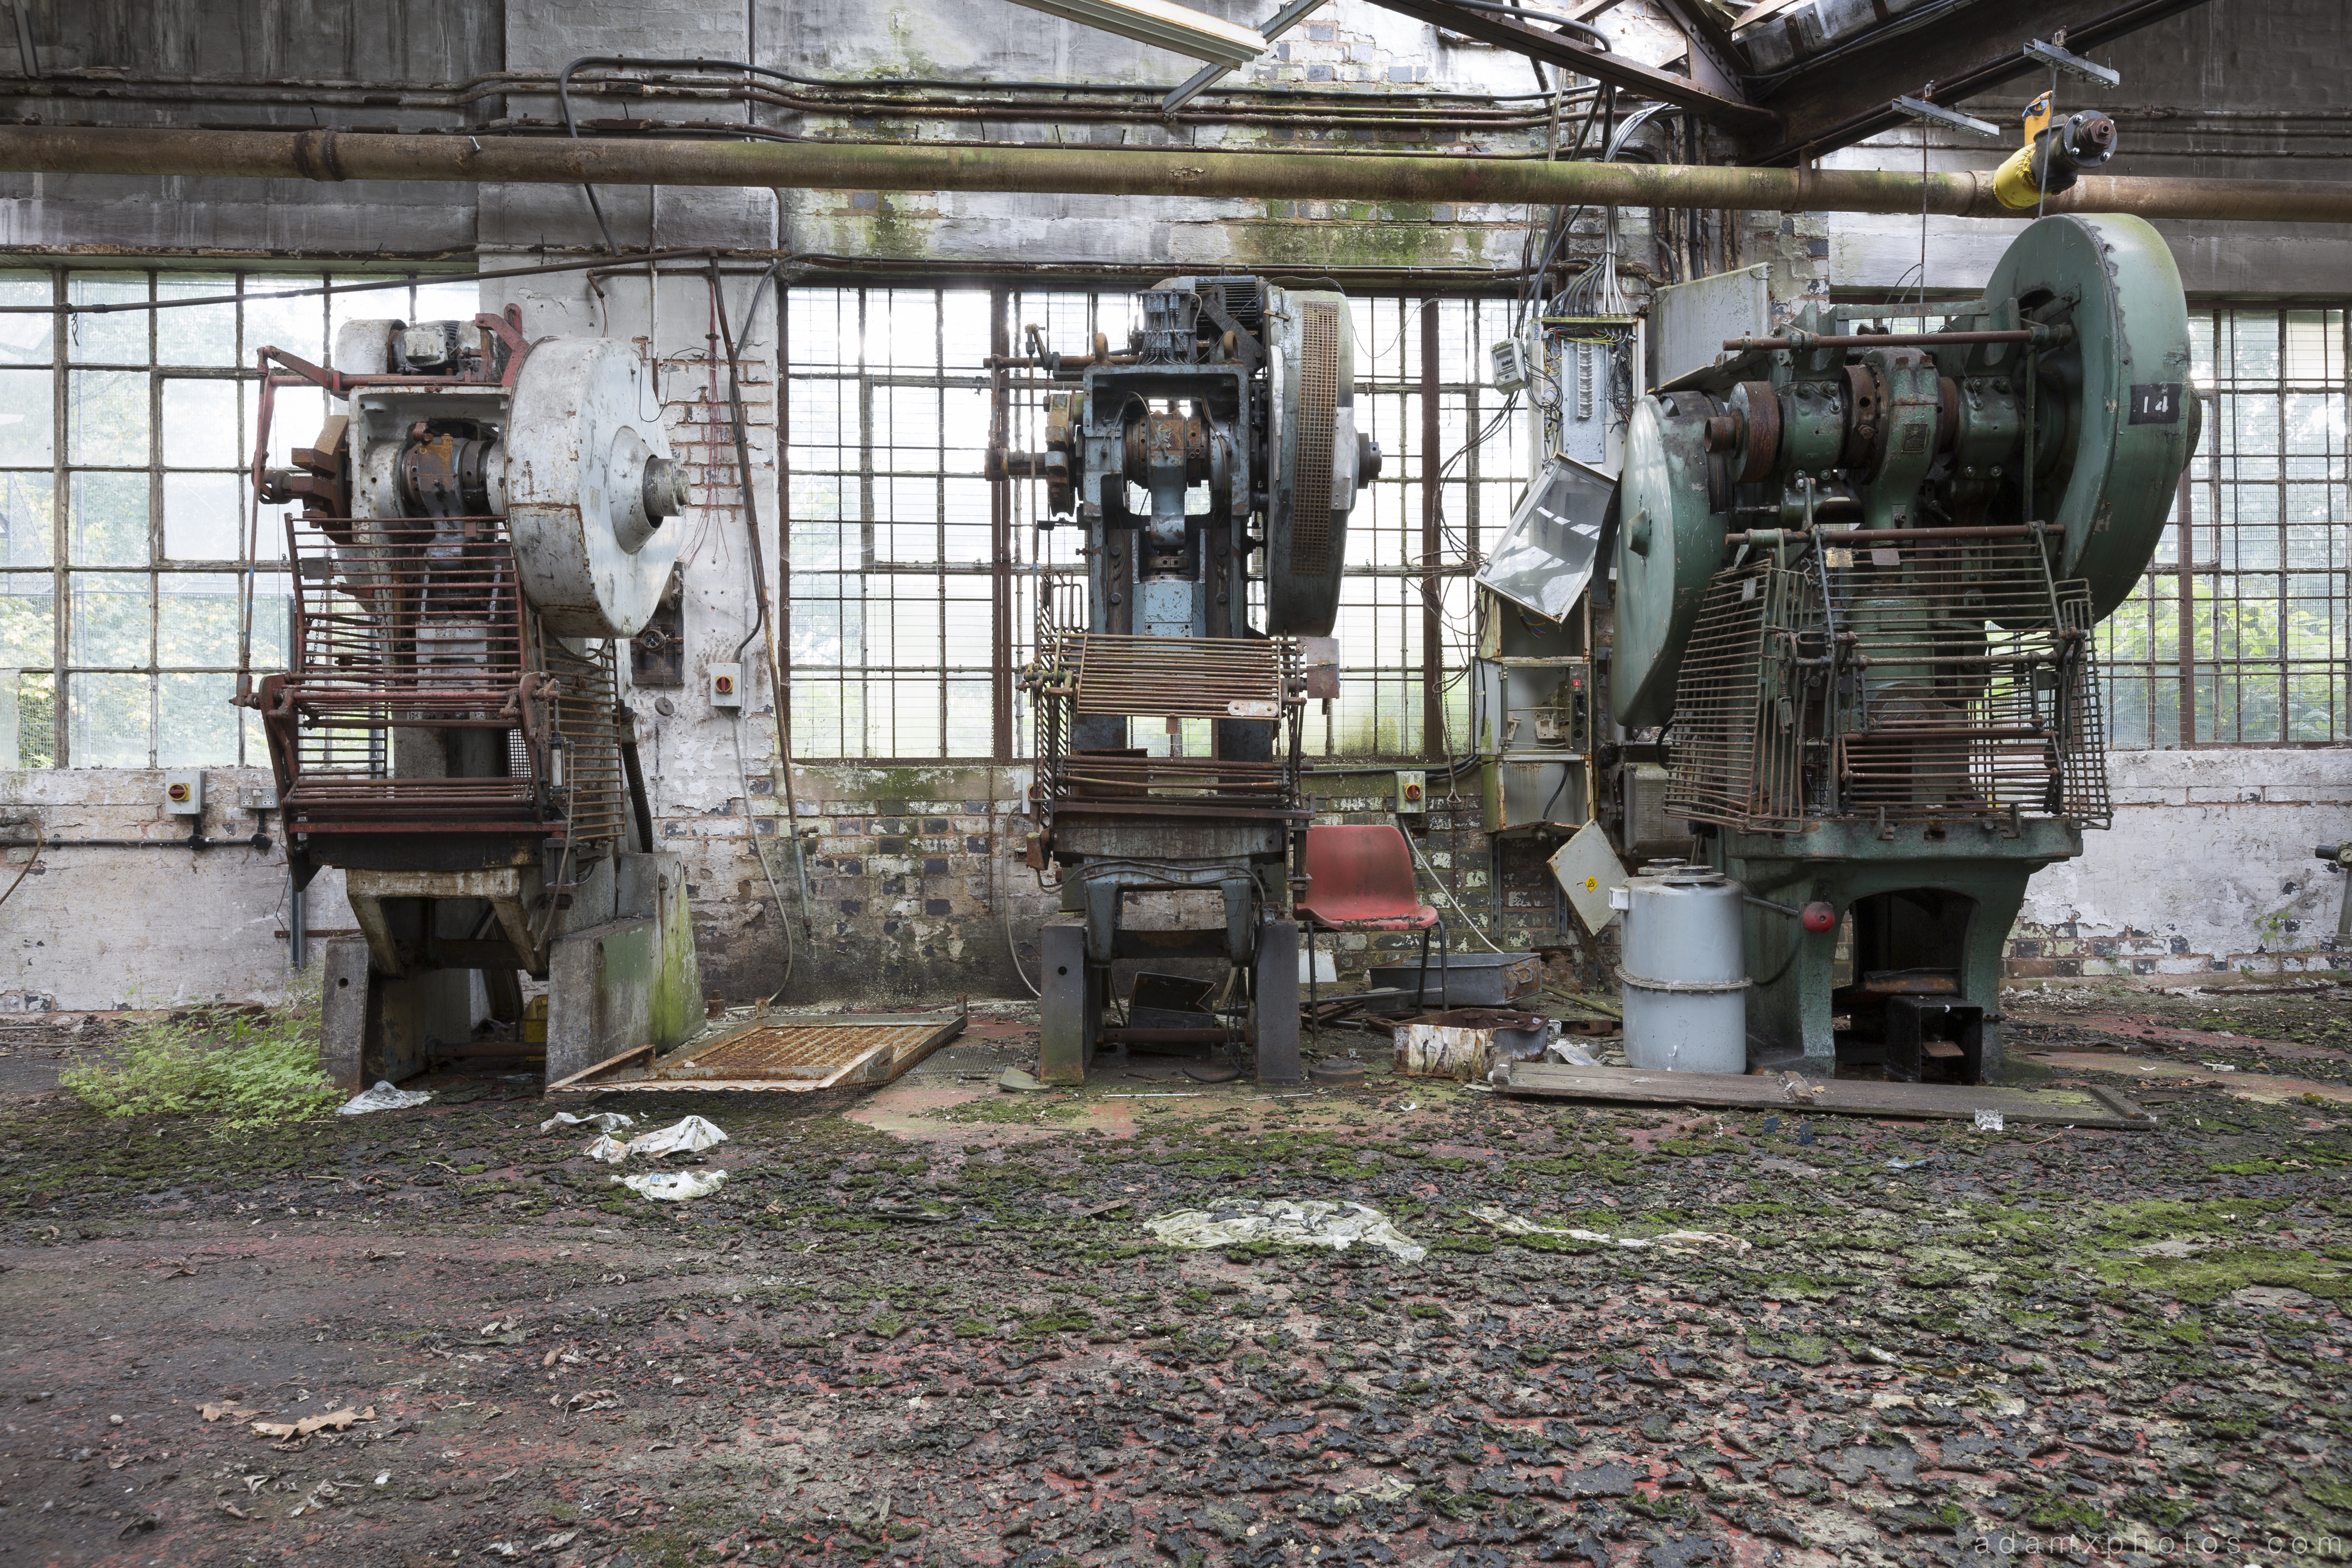 machines obsolete West Bromwich Spring Company Helical Works Springs industry industrial Urbex Adam X Urban Exploration 2015 Abandoned decay lost forgotten derelict